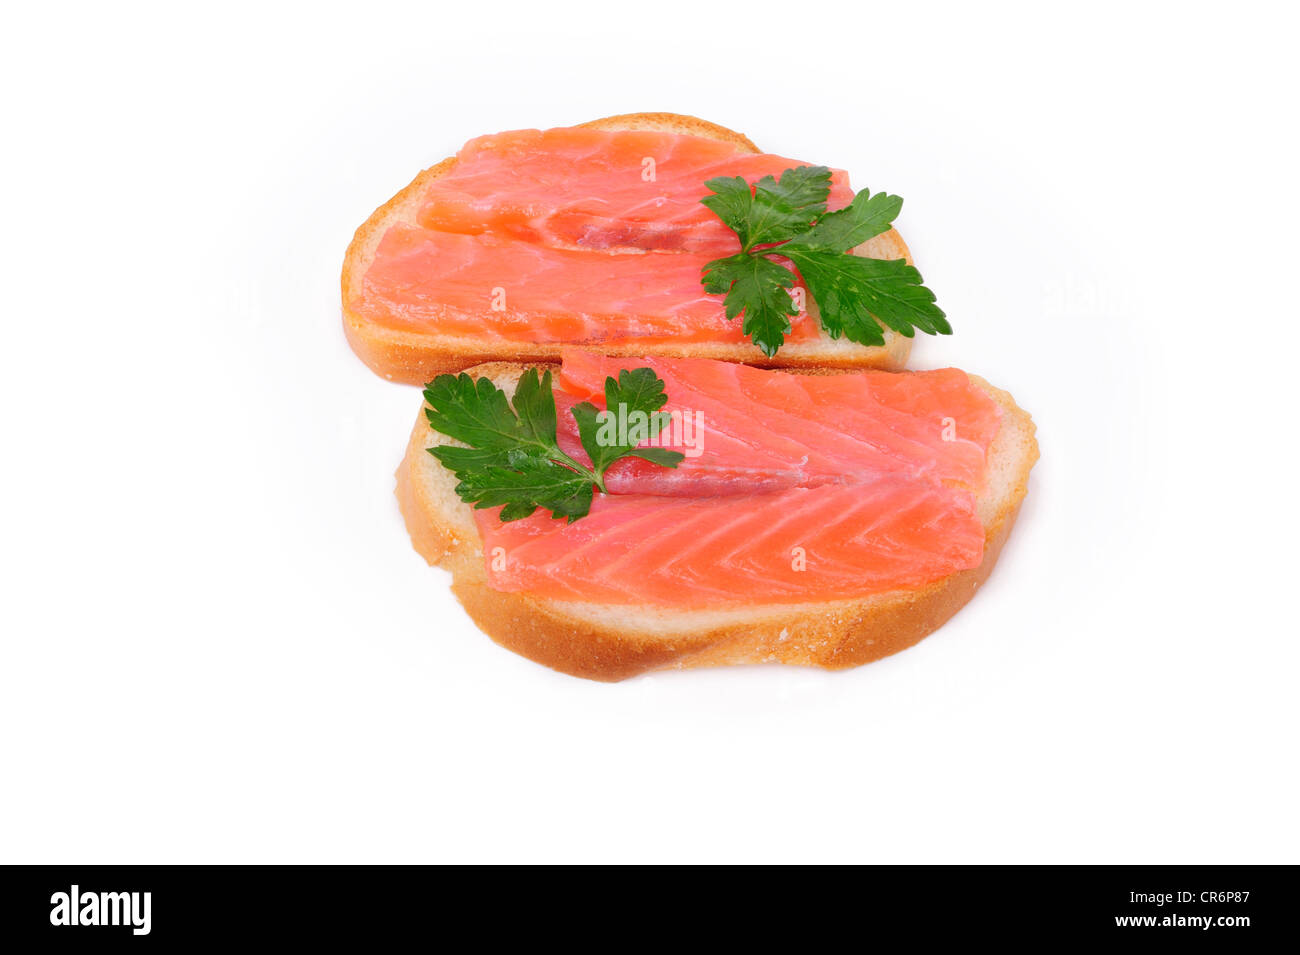 Sandwiches with red fish jn a white background Stock Photo